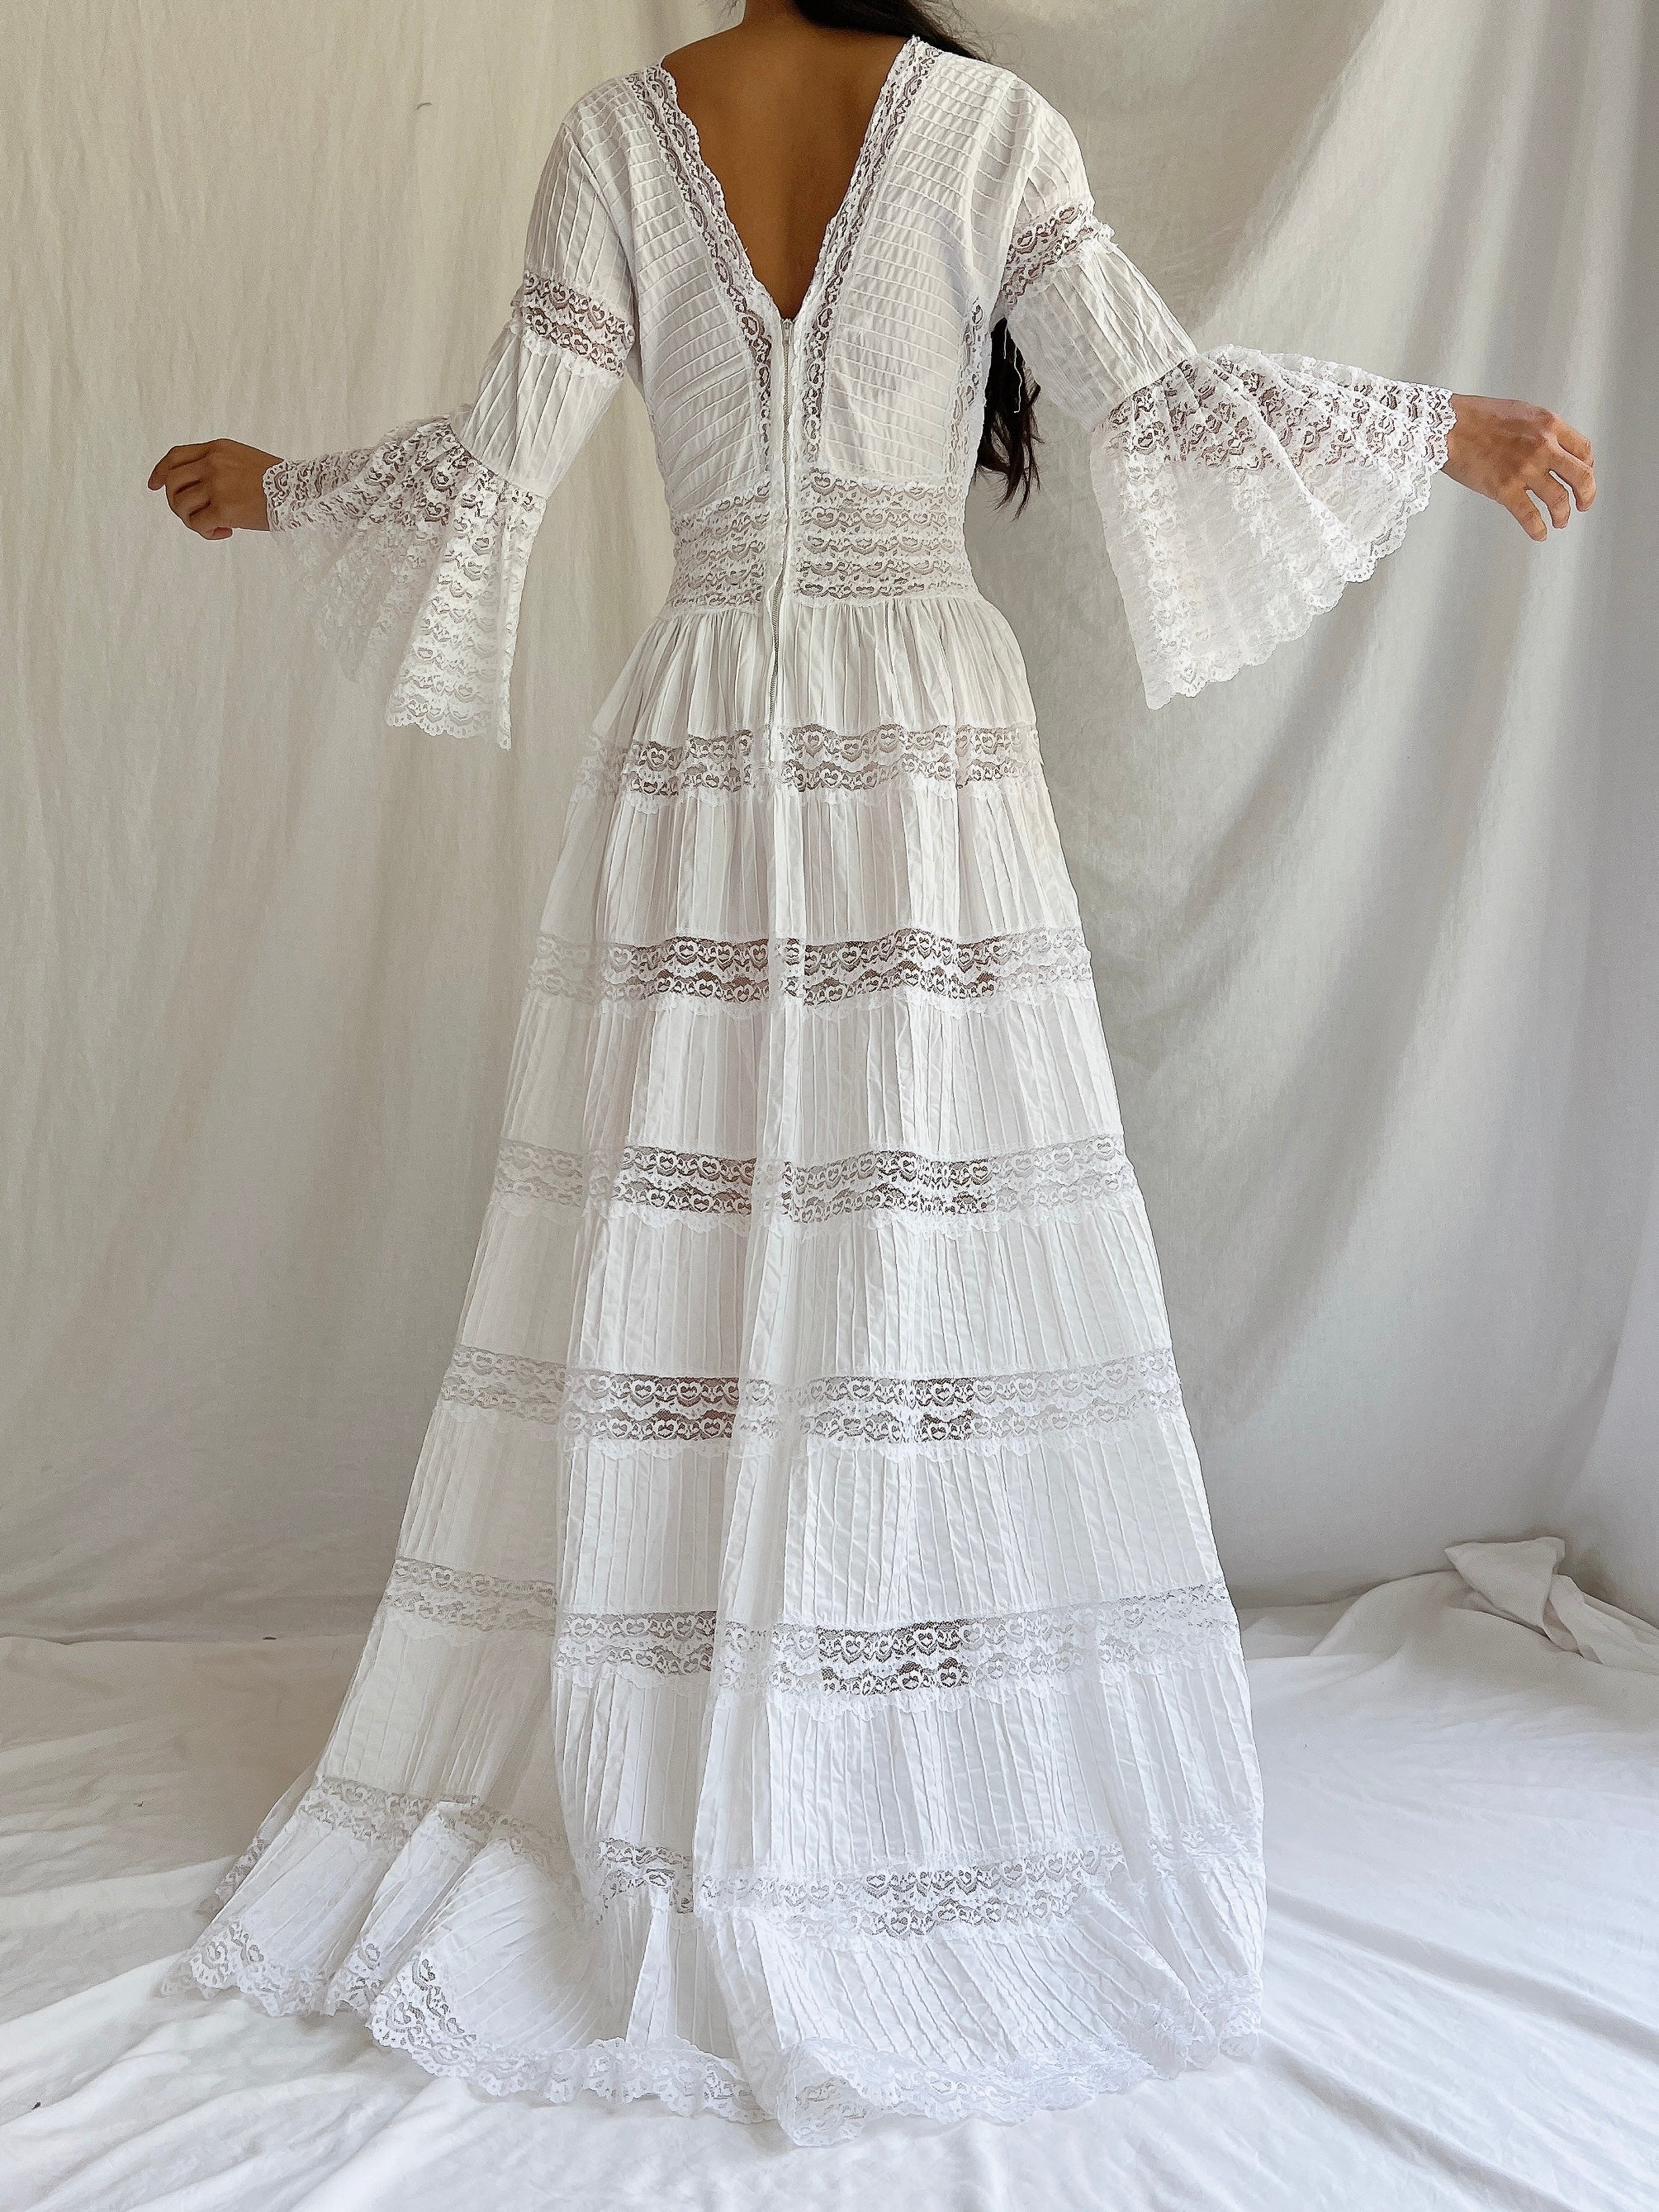 1979s White Lace Bell Sleeves Pintucked Gown - S